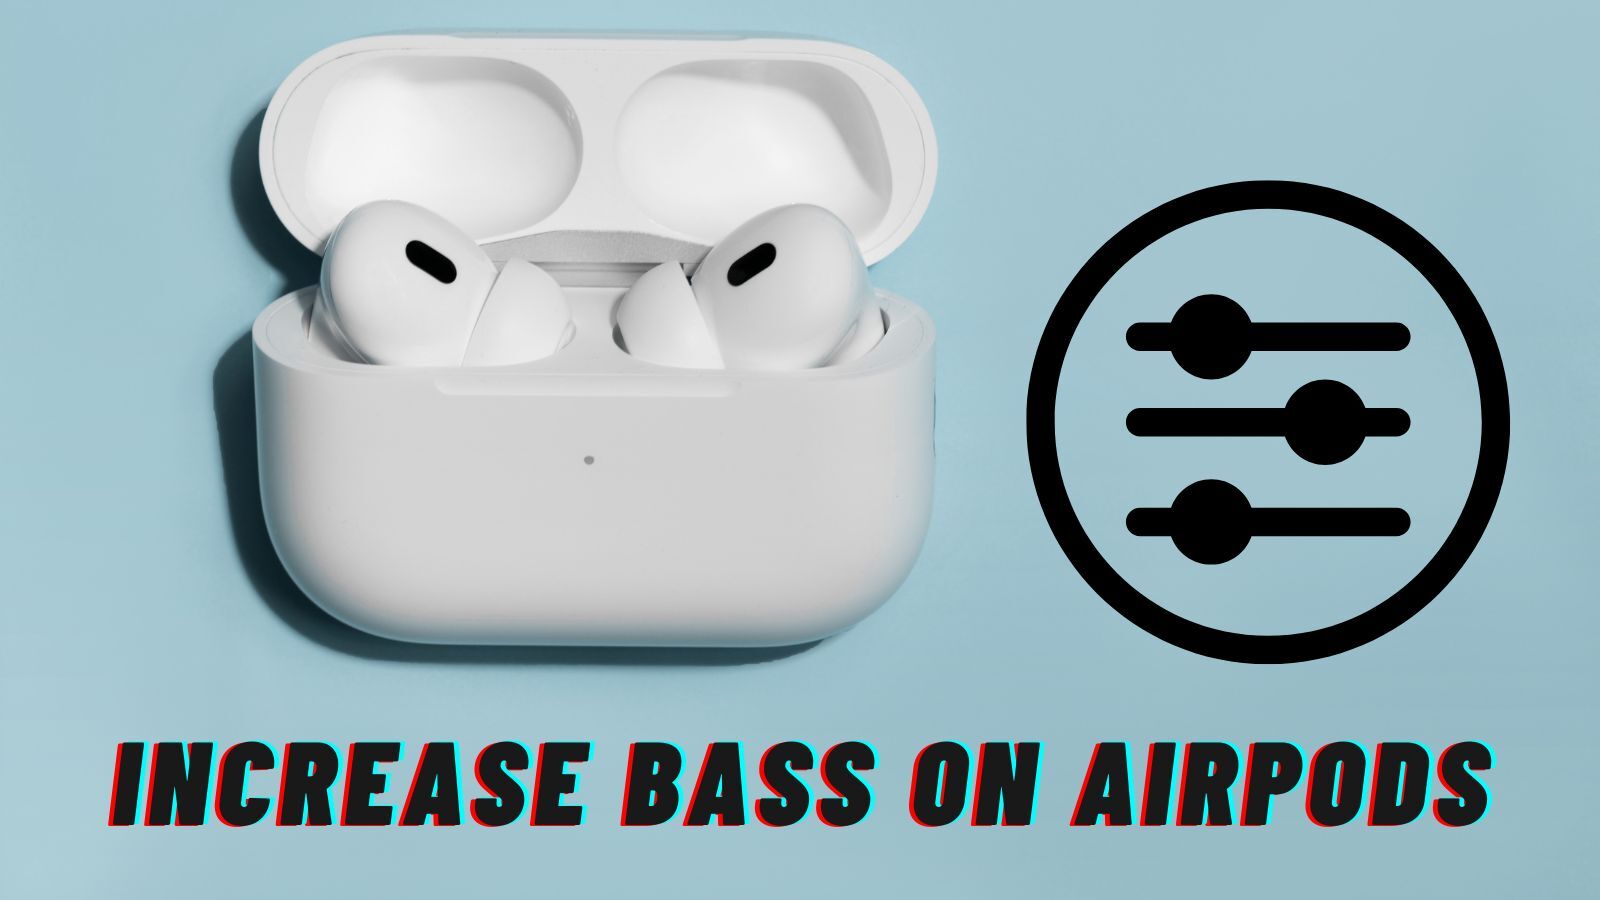 How to Increase Bass on Airpods? (8 Simple Ways)